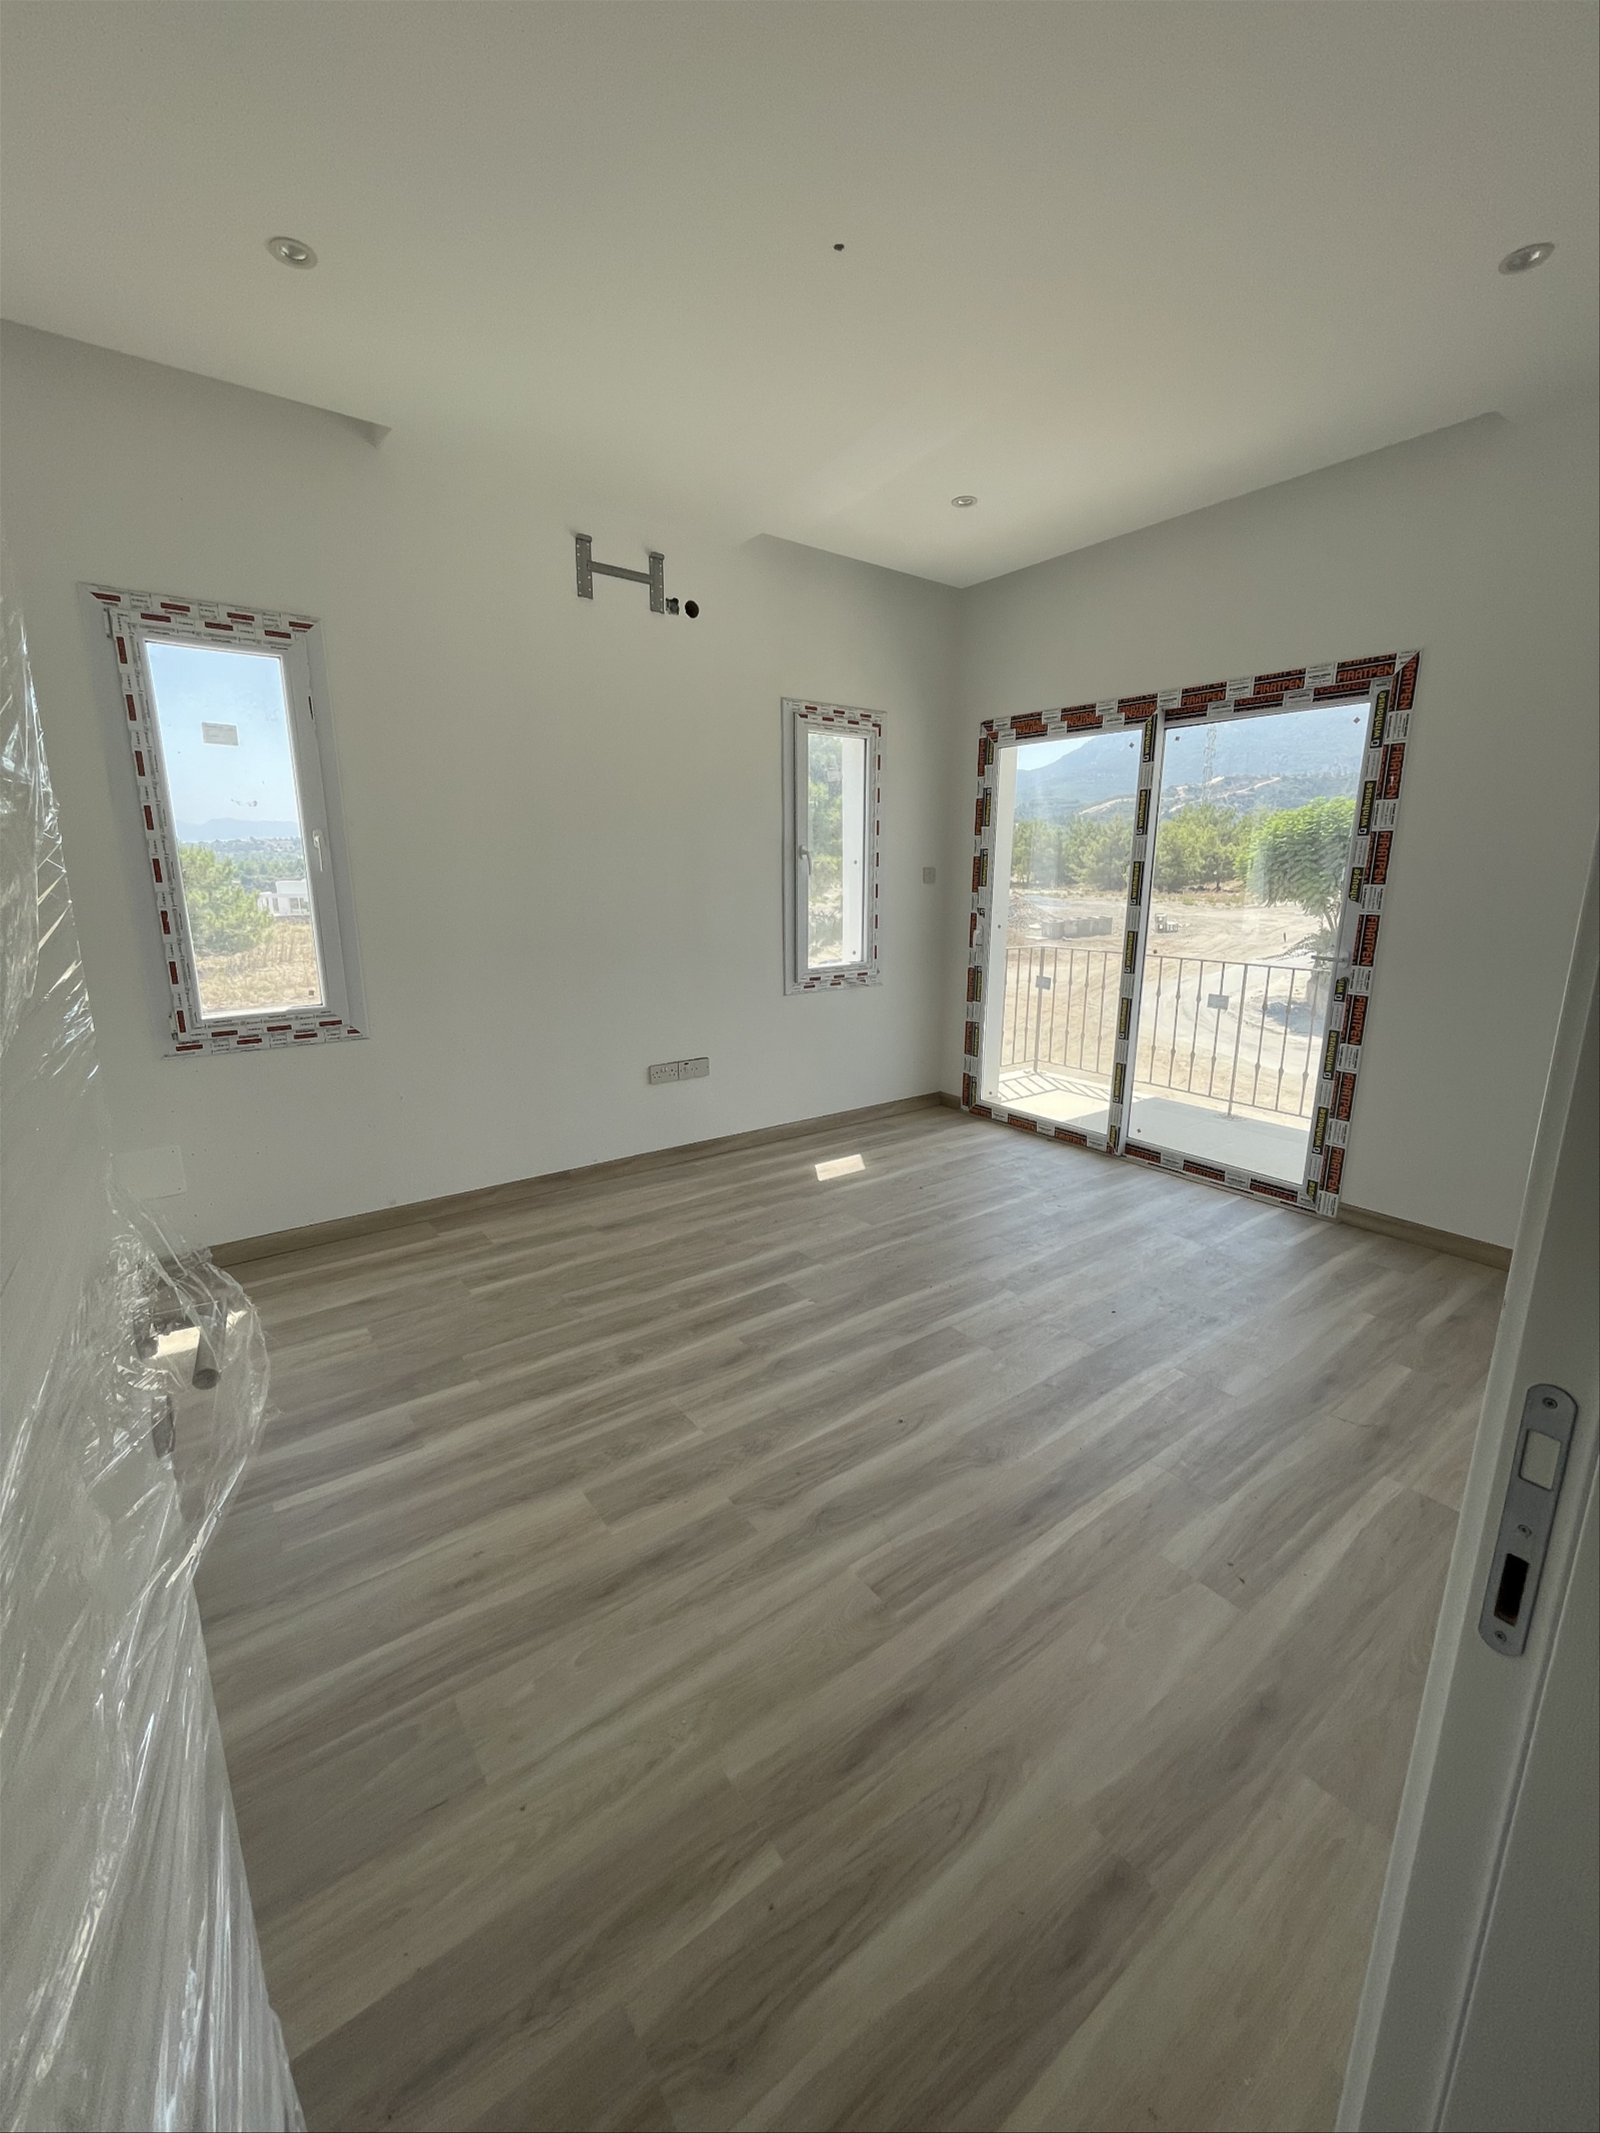 For Sale 3+1 New Villa in Catalkoy-df2cc301-ef20-4c1b-9782-b77fd5d2ee4f